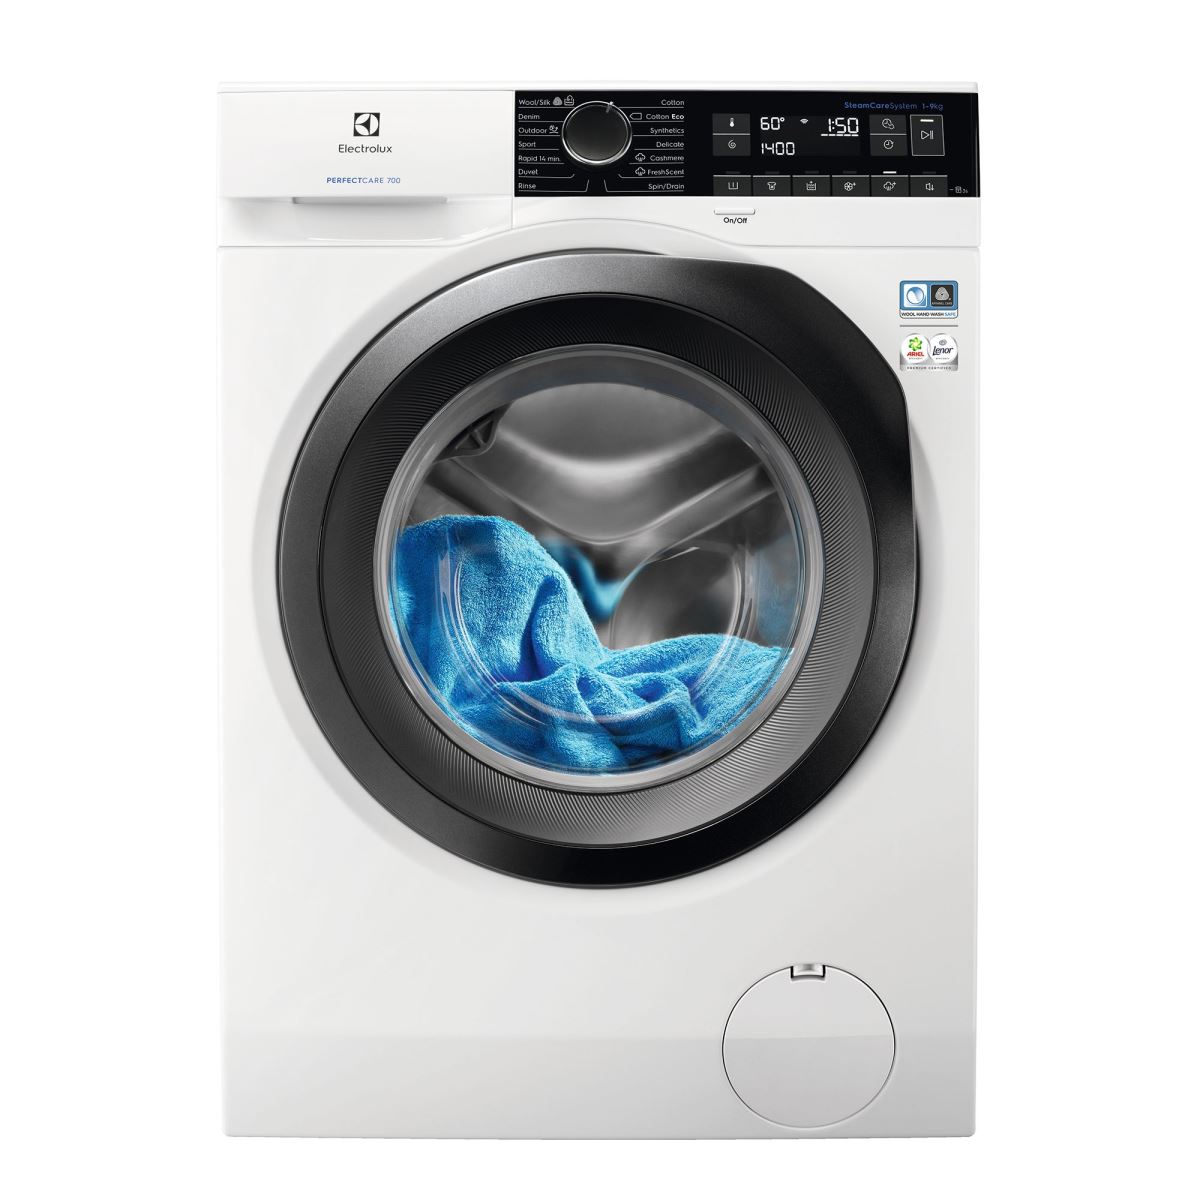 Masina de spalat rufe Electrolux PerfectCare EW7F249S, 9 kg, 1400 rpm, SteamCare System, Display, Alb